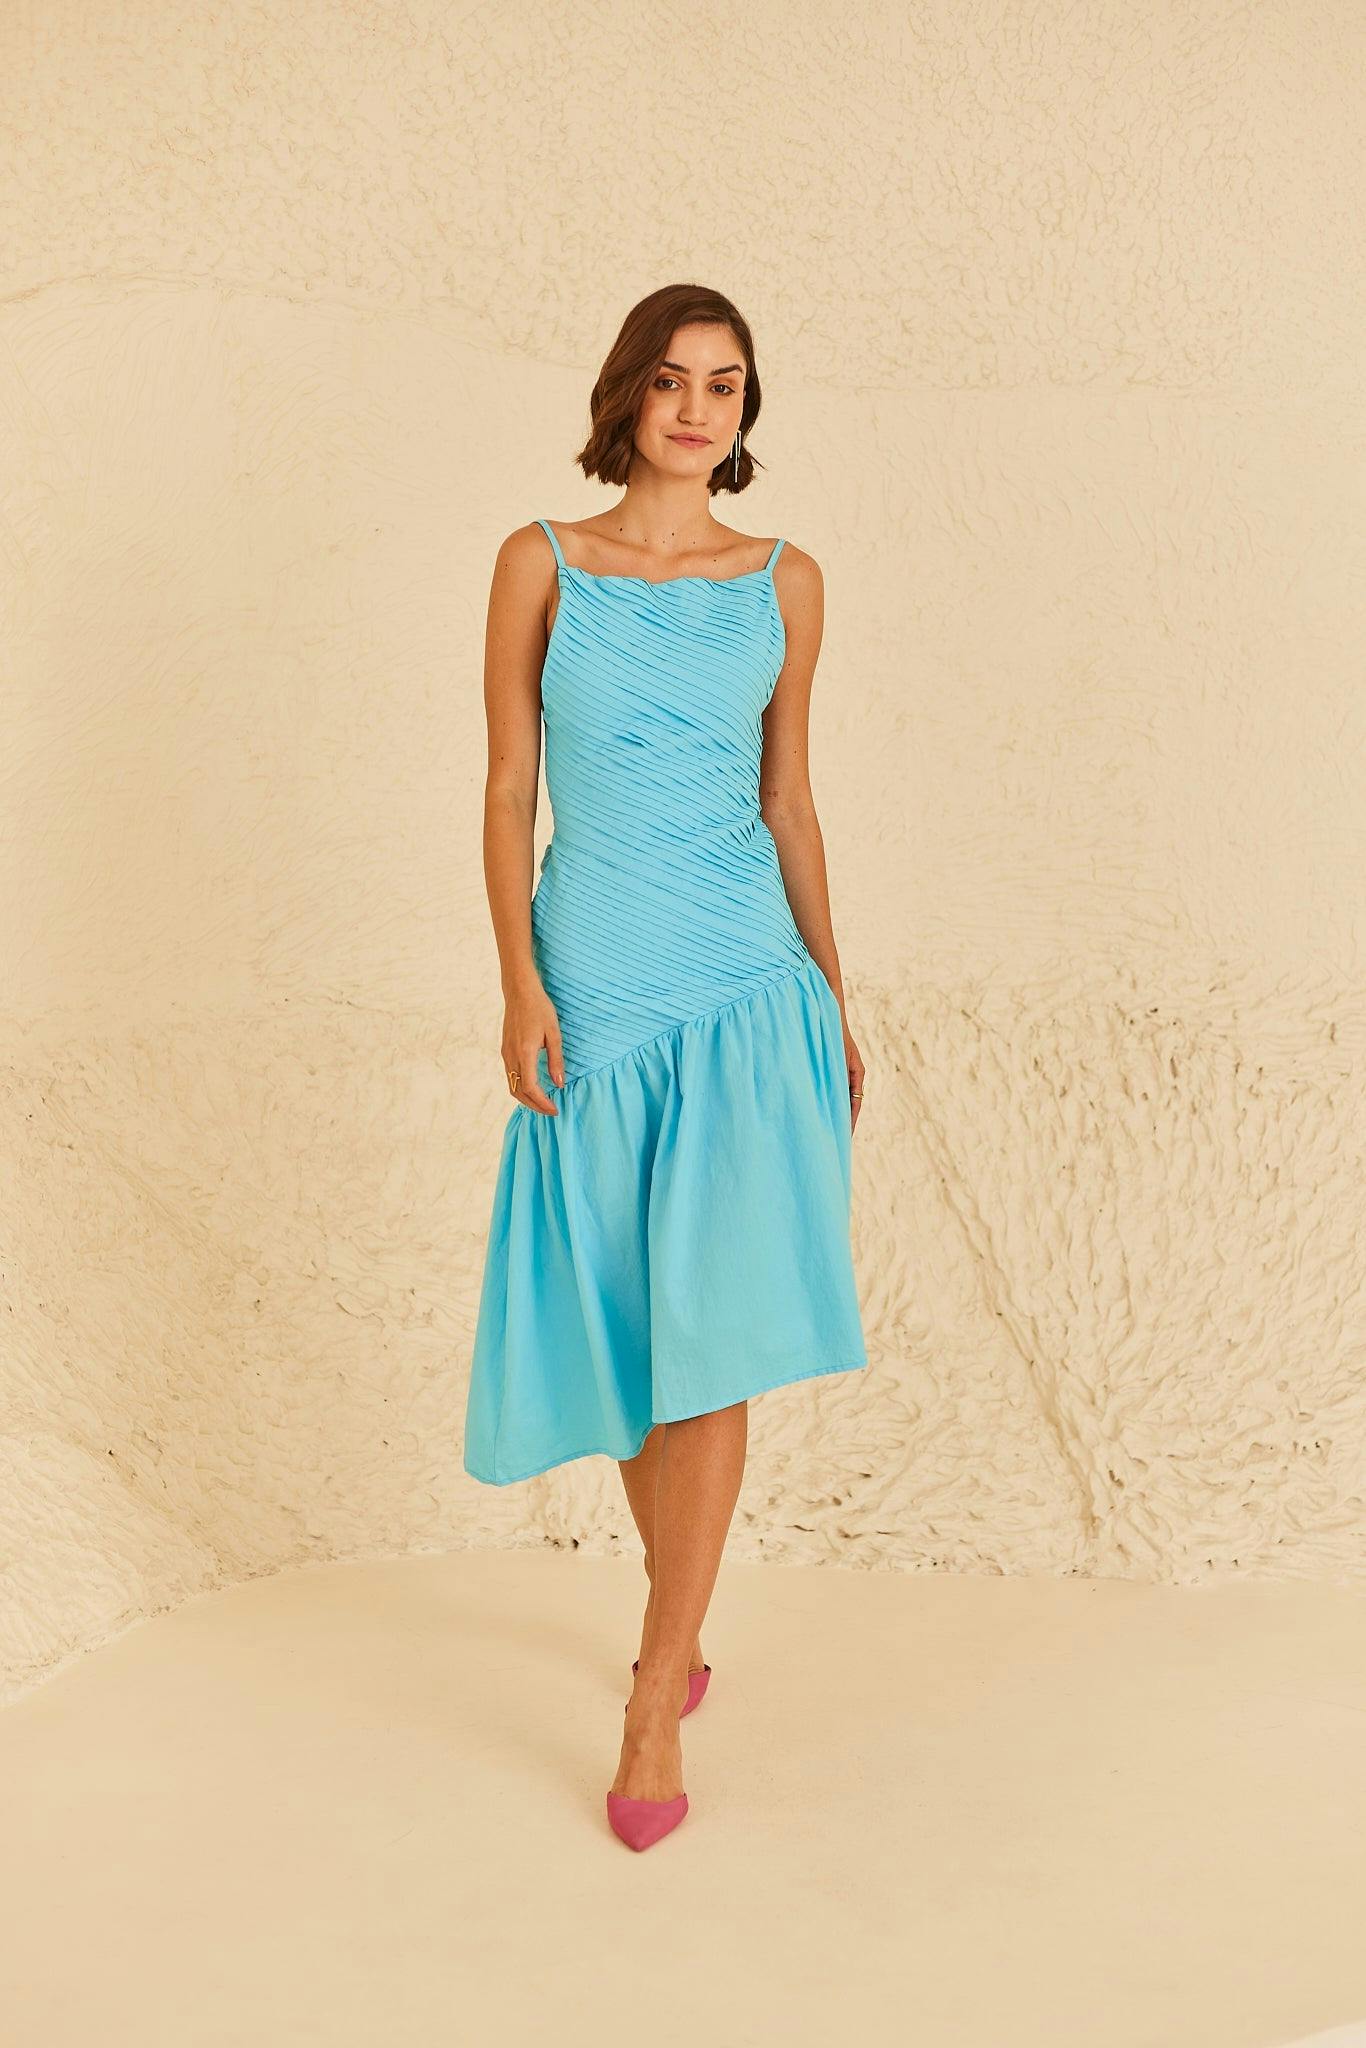 Aqua Allure Backless Dress, a product by Sage By Mala